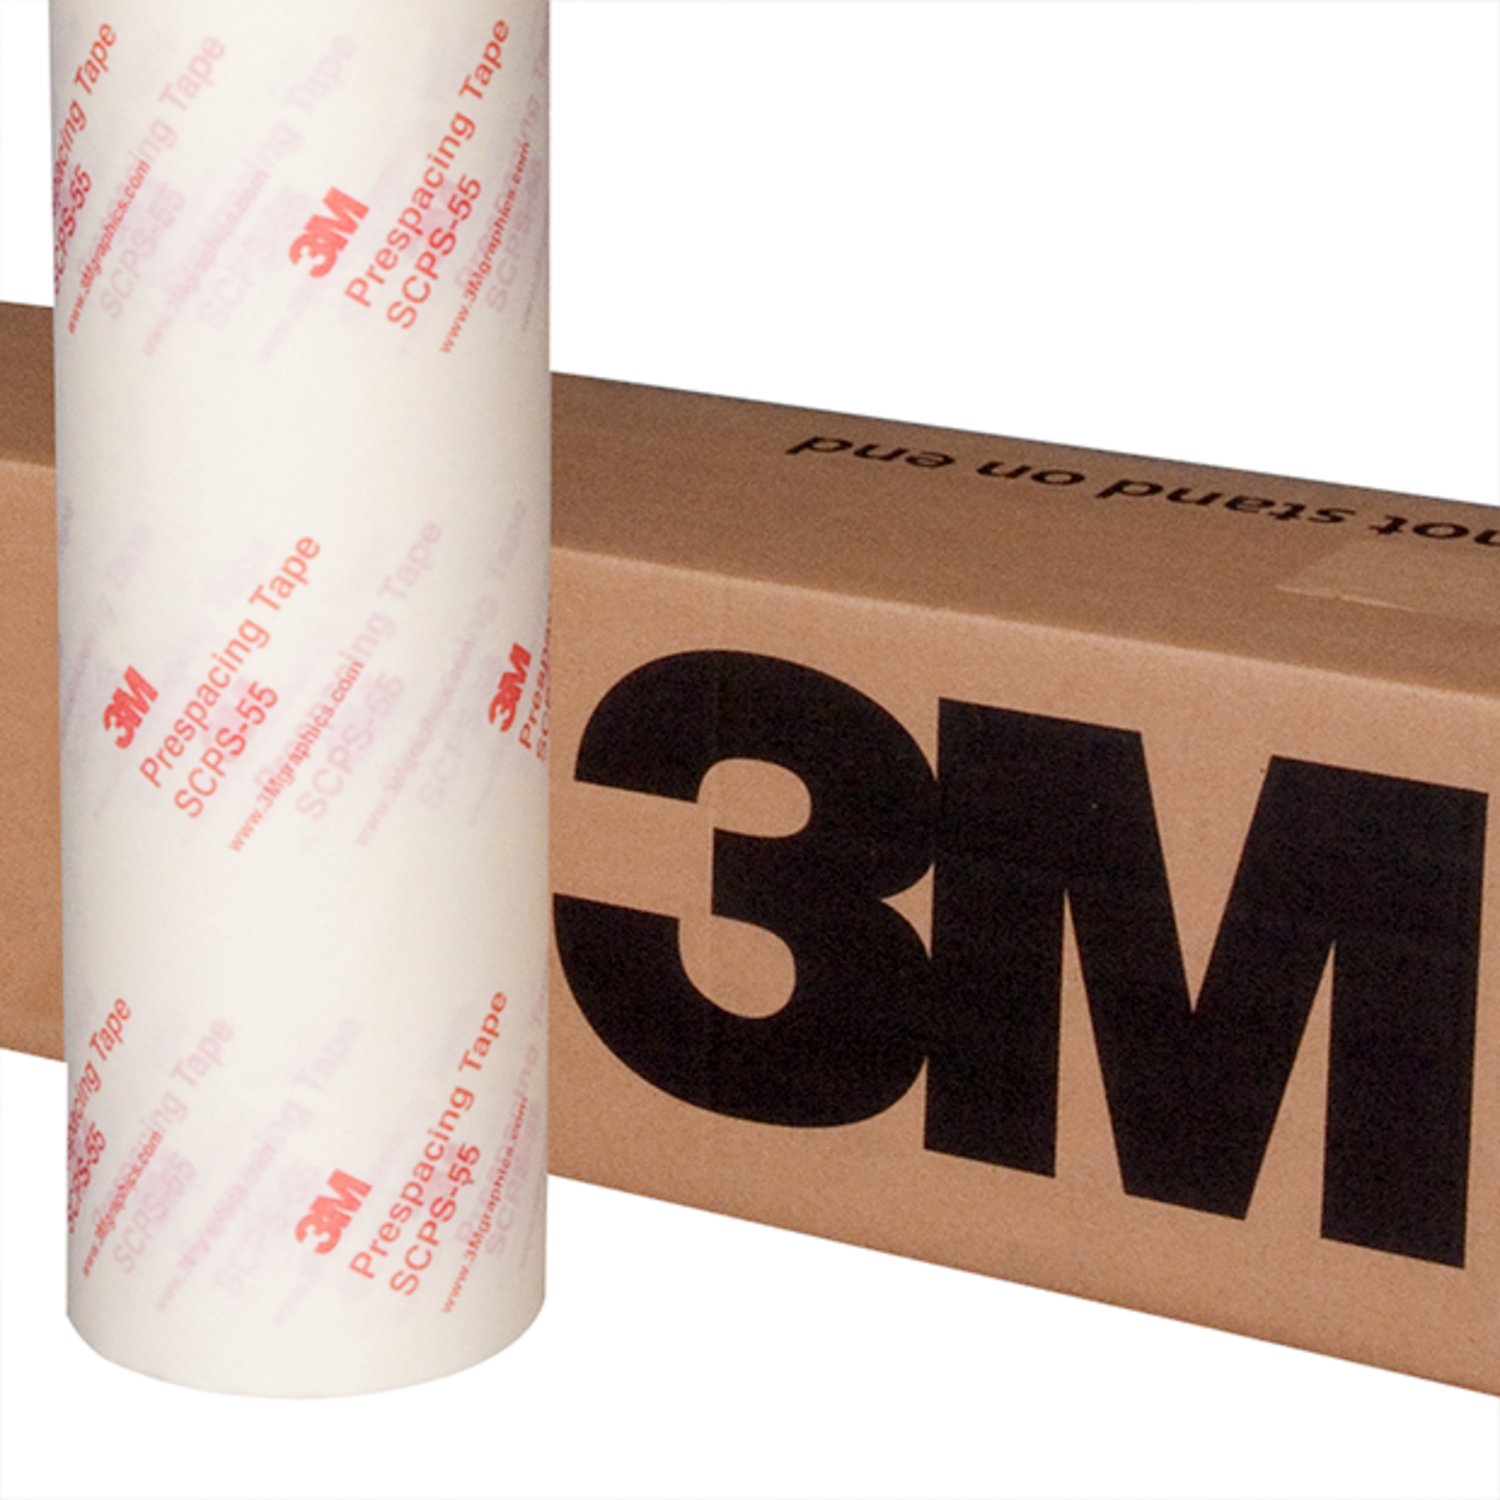 7010290152 - 3M Prespacing Tape SCPS-55, 54 in x 100 yd, 1 Roll/Case